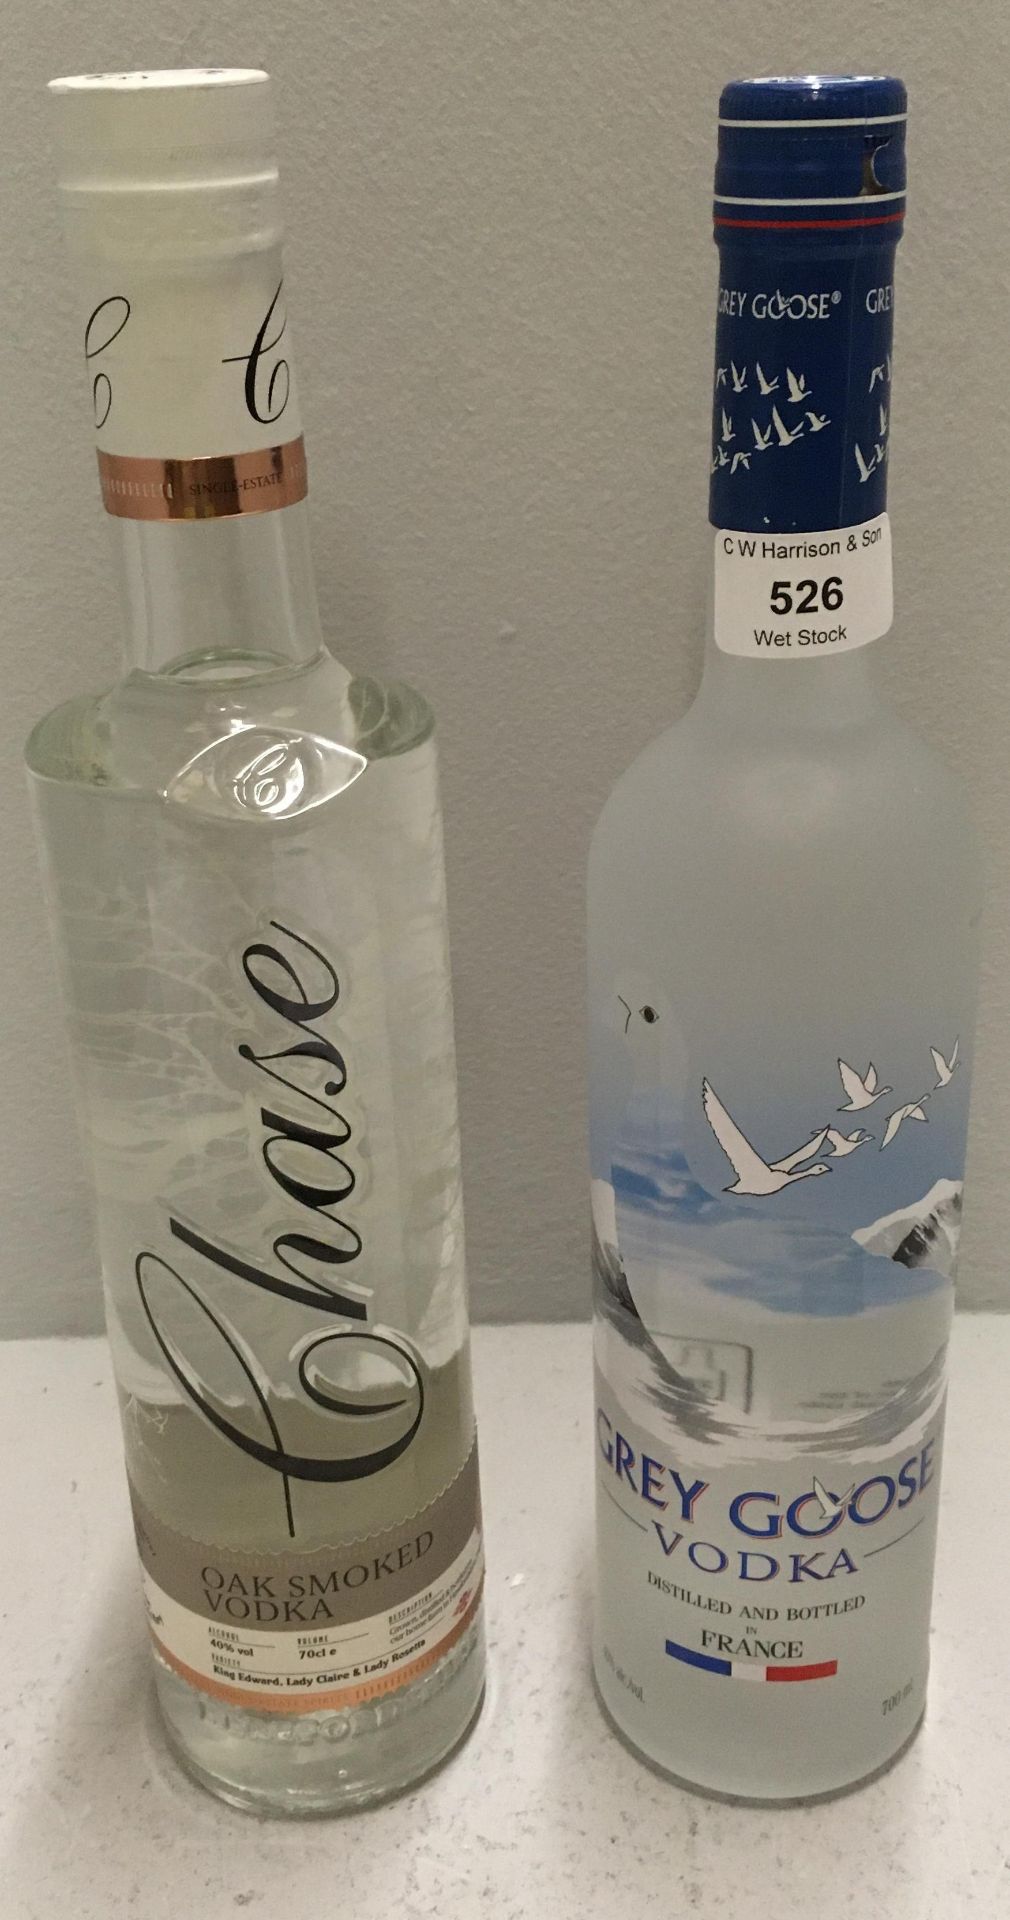 2 x items - 1 x 70cl bottle of Chase Old Smoked Vodka and 1 x 700ml bottle of Grey Goose Vodka